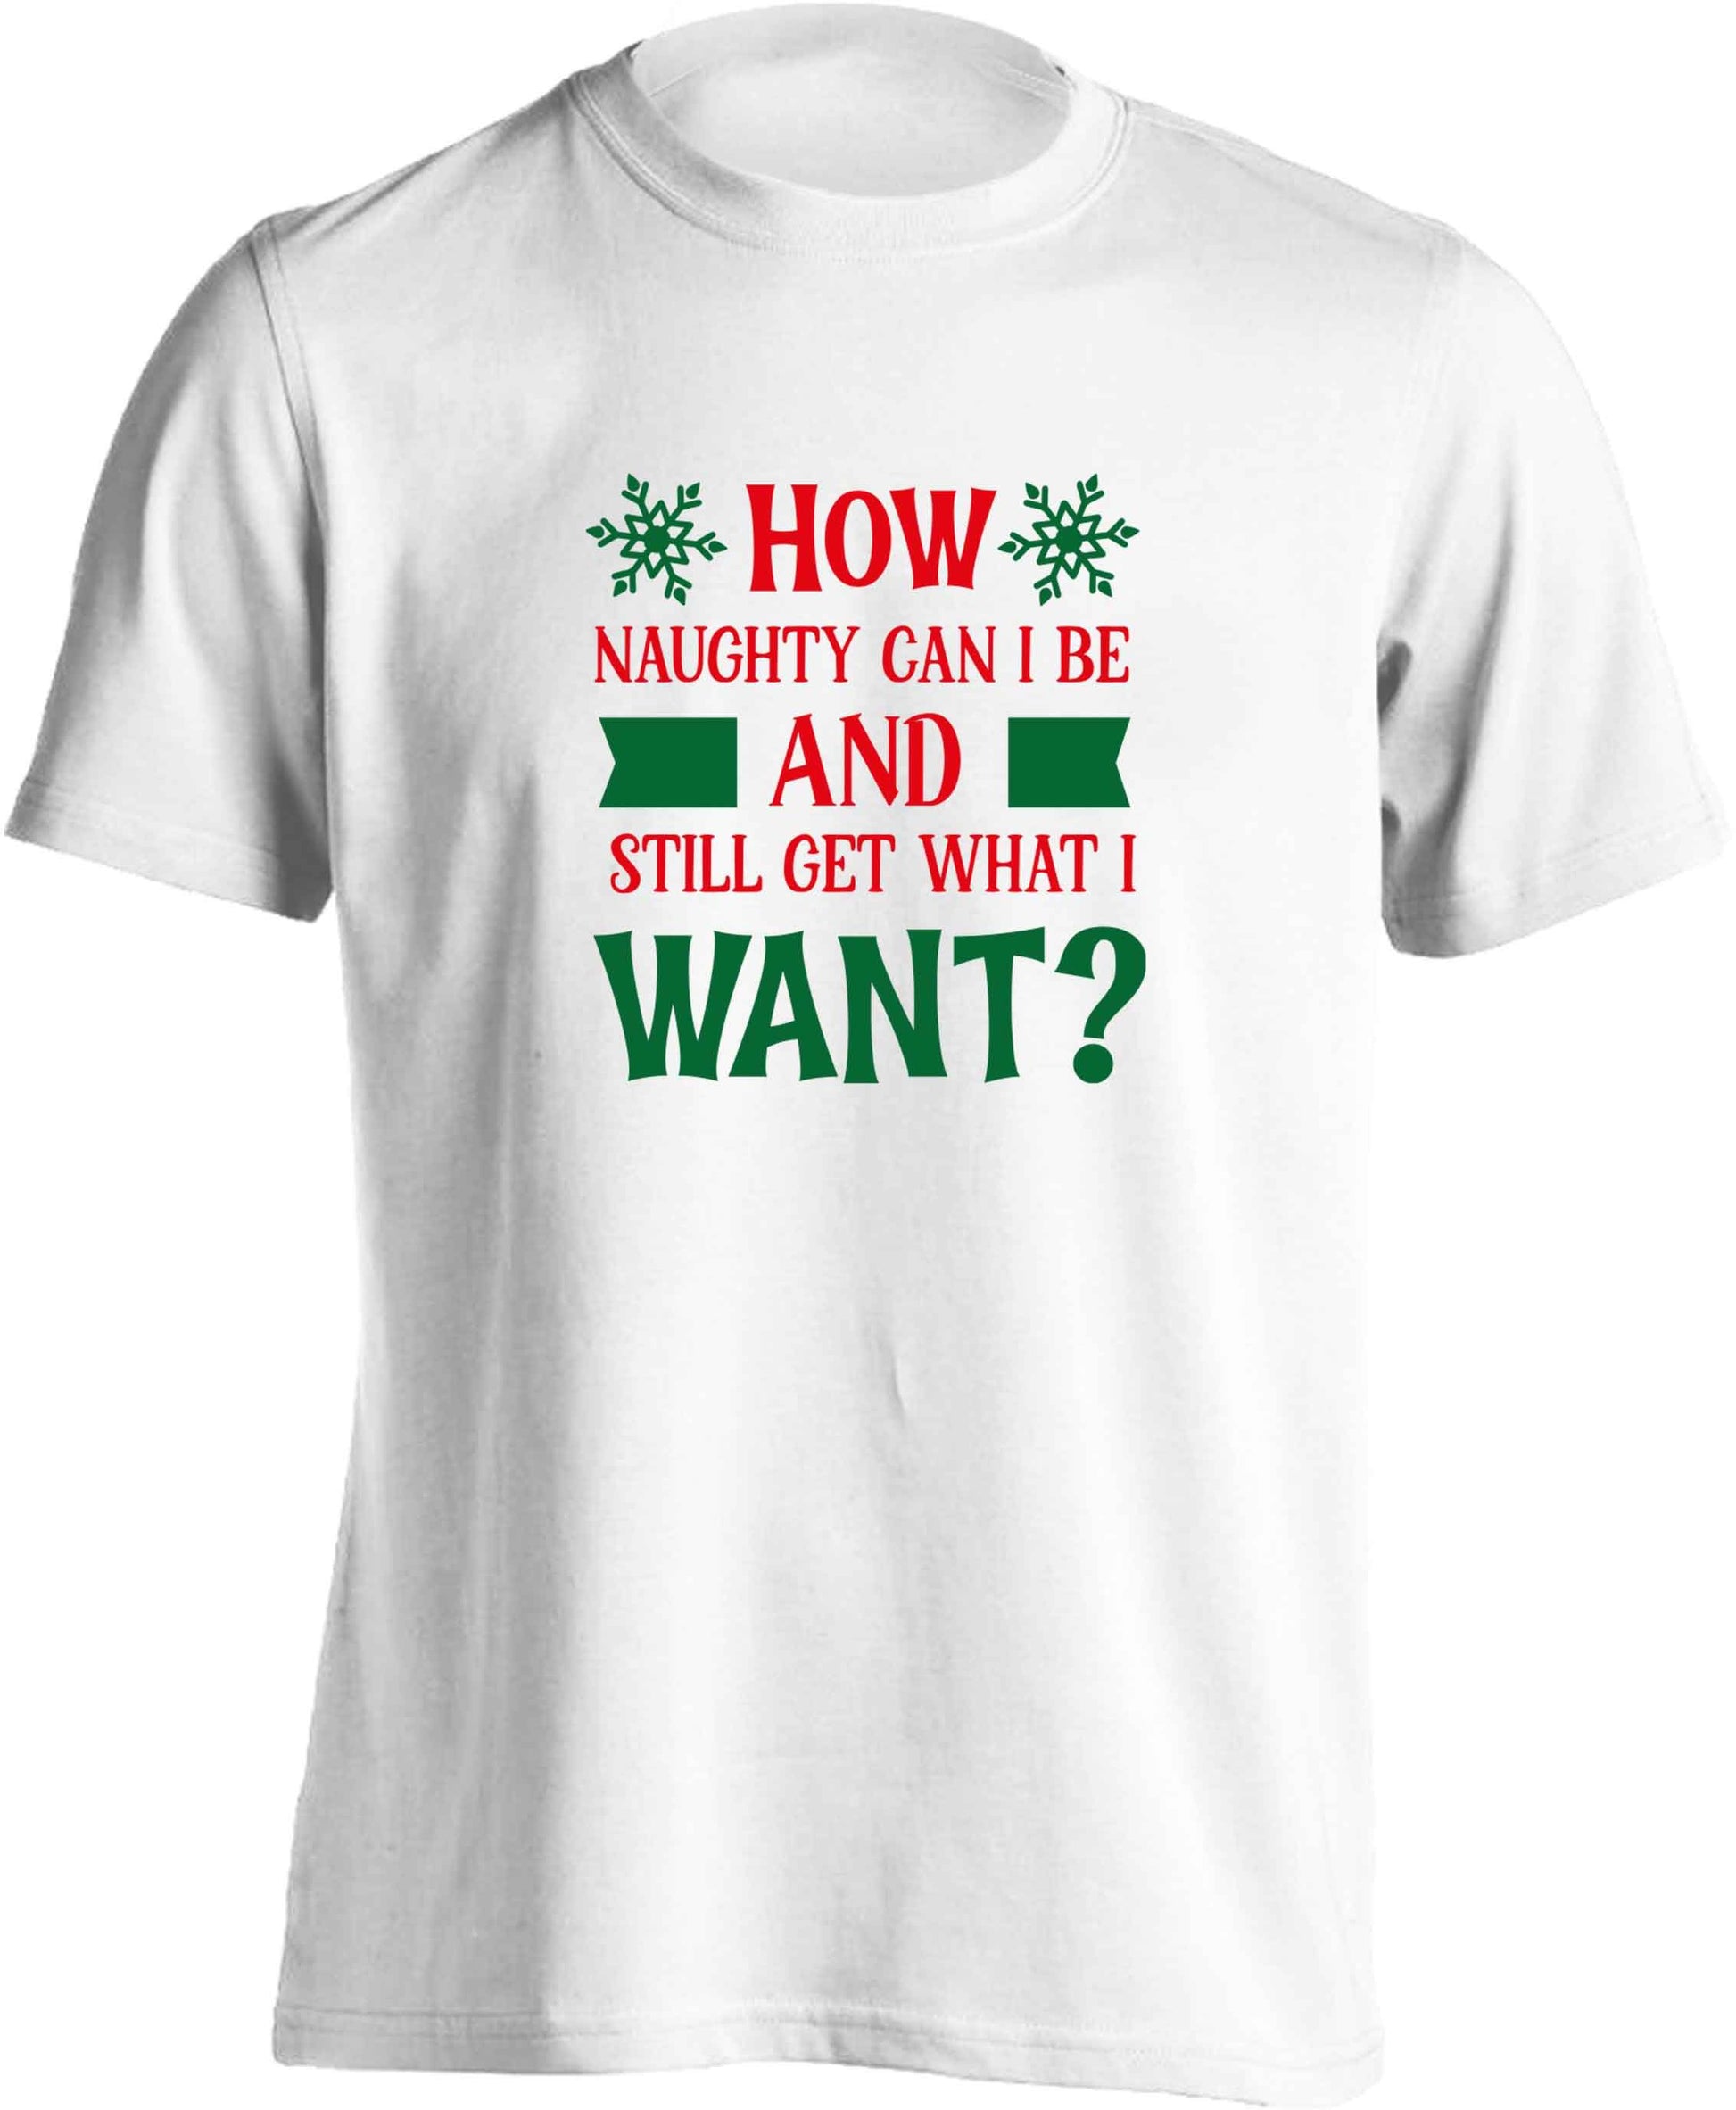 How naughty can I be and still get what I want? adults unisex white Tshirt 2XL